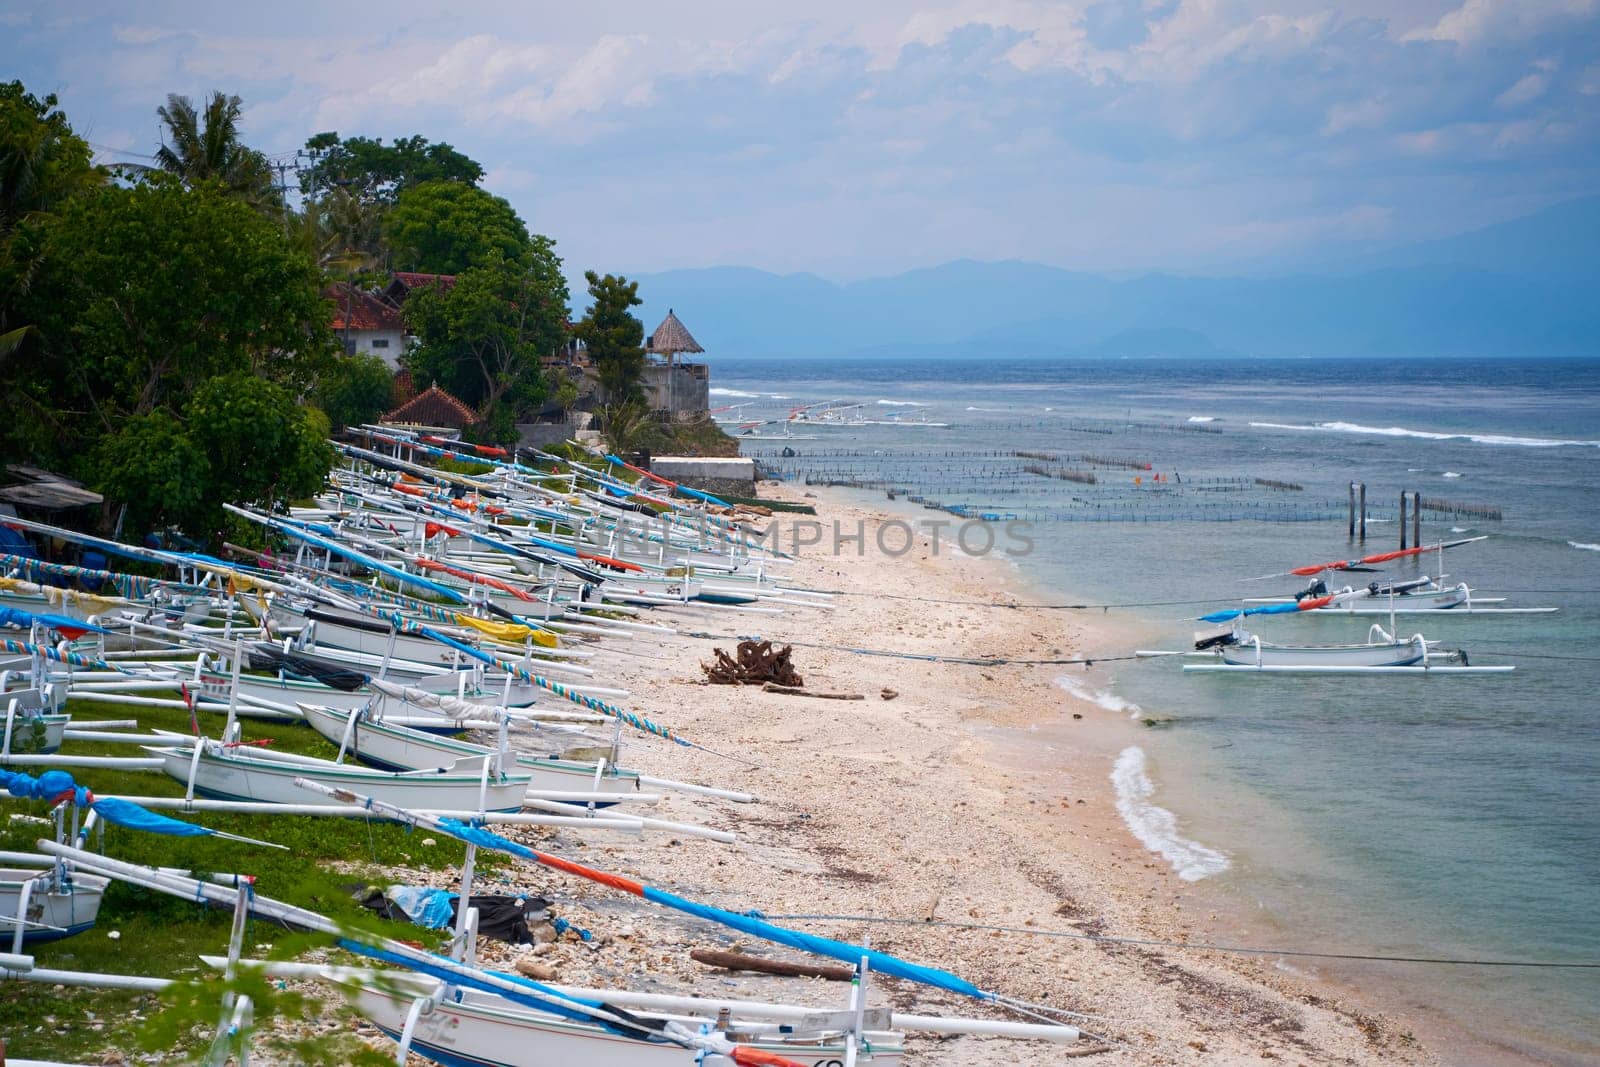 Traditional local colored fisherman's catamaran boats are lined up on the ocean shore on an island in Indonesia. by Try_my_best